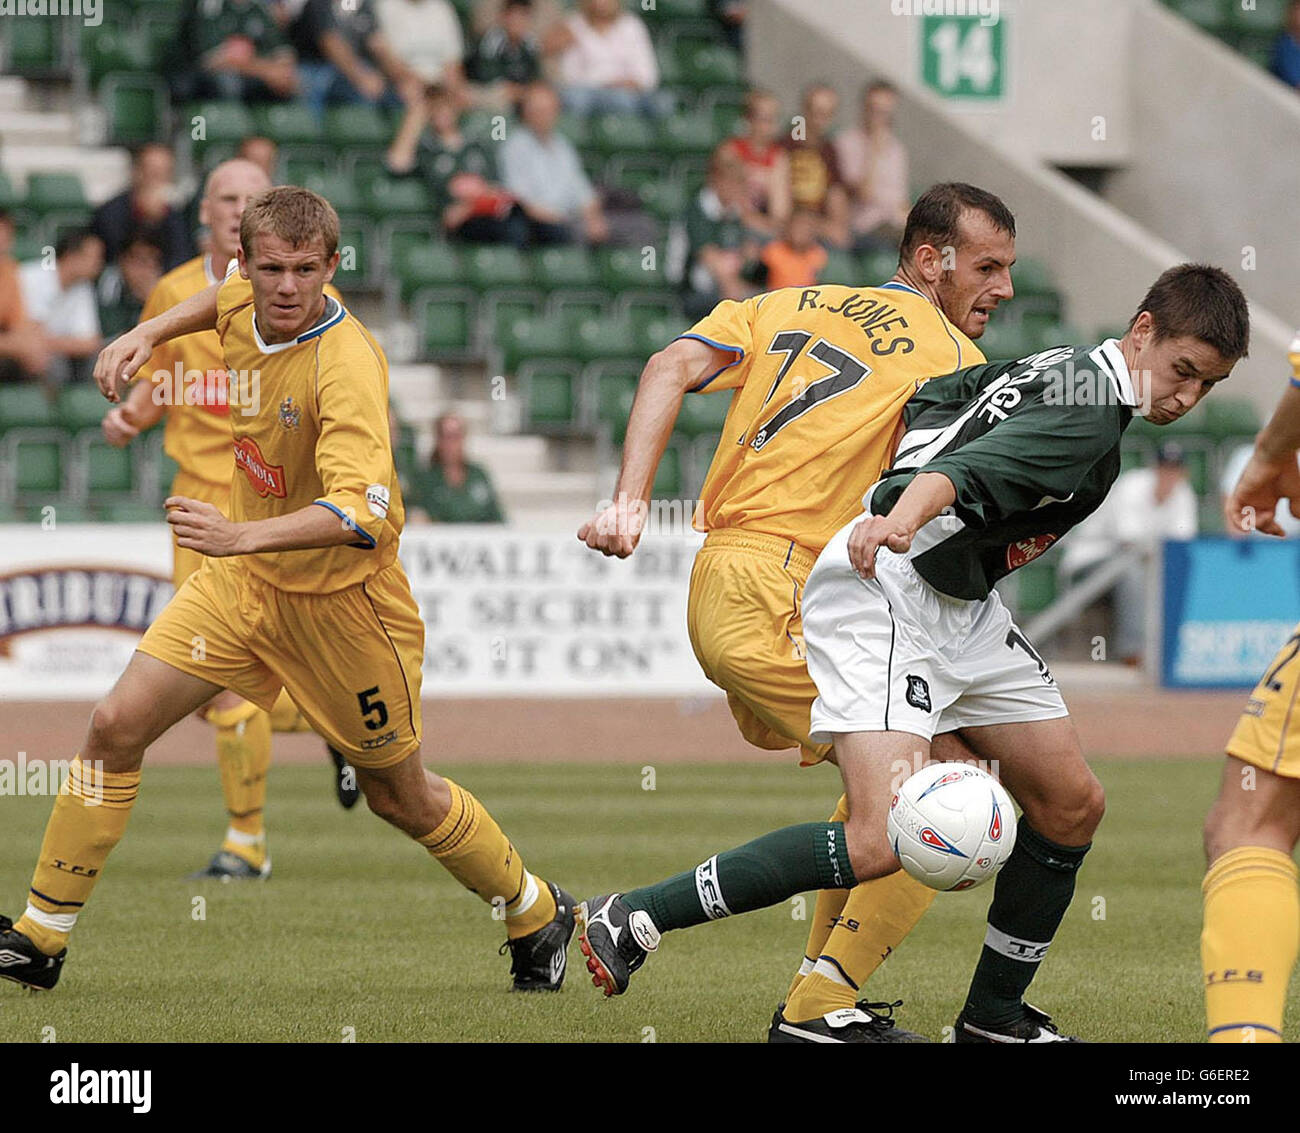 Plymouth striker Ian Stonebridge goes past Stockport defenders Robert Jones (centre) and Robert Clare during their Nationwide Division Two match at Plymouth's Home Park ground. NO UNOFFICIAL CLUB WEBSITE USE. Stock Photo